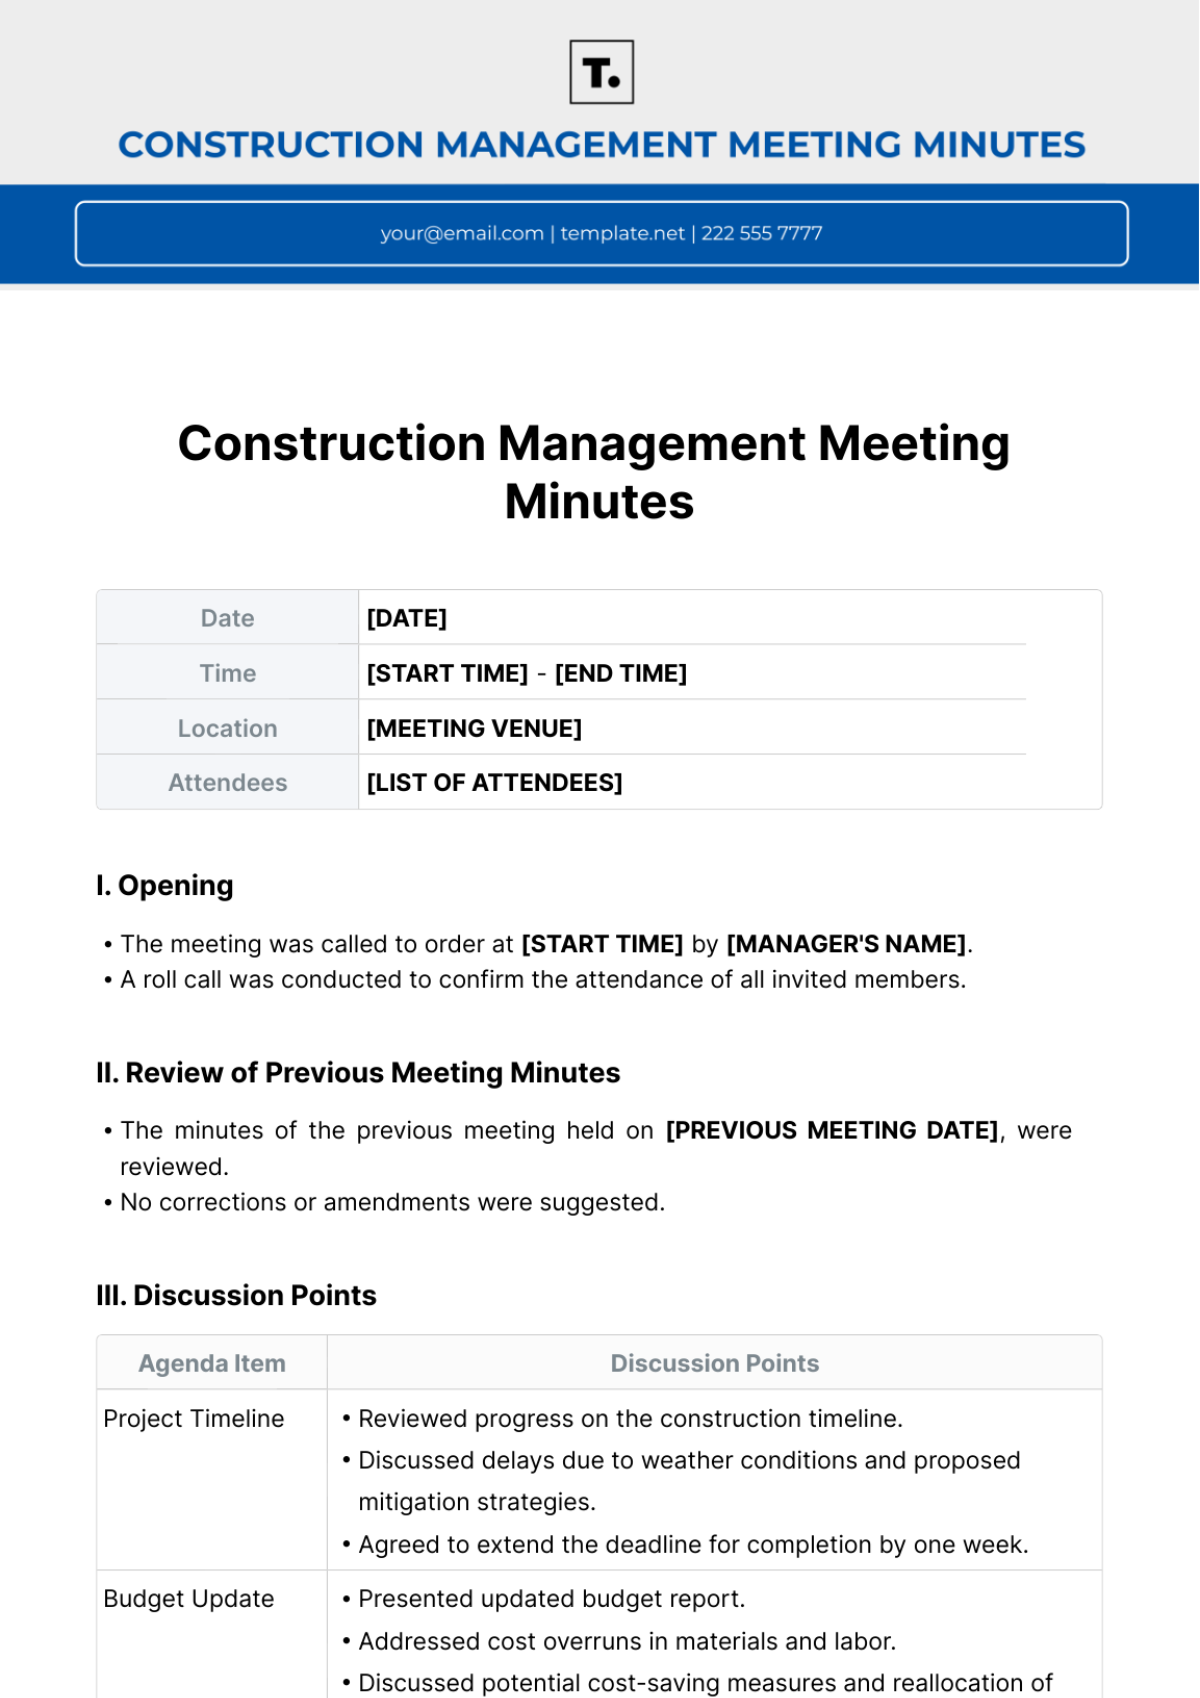 Construction Management Meeting Minutes Template